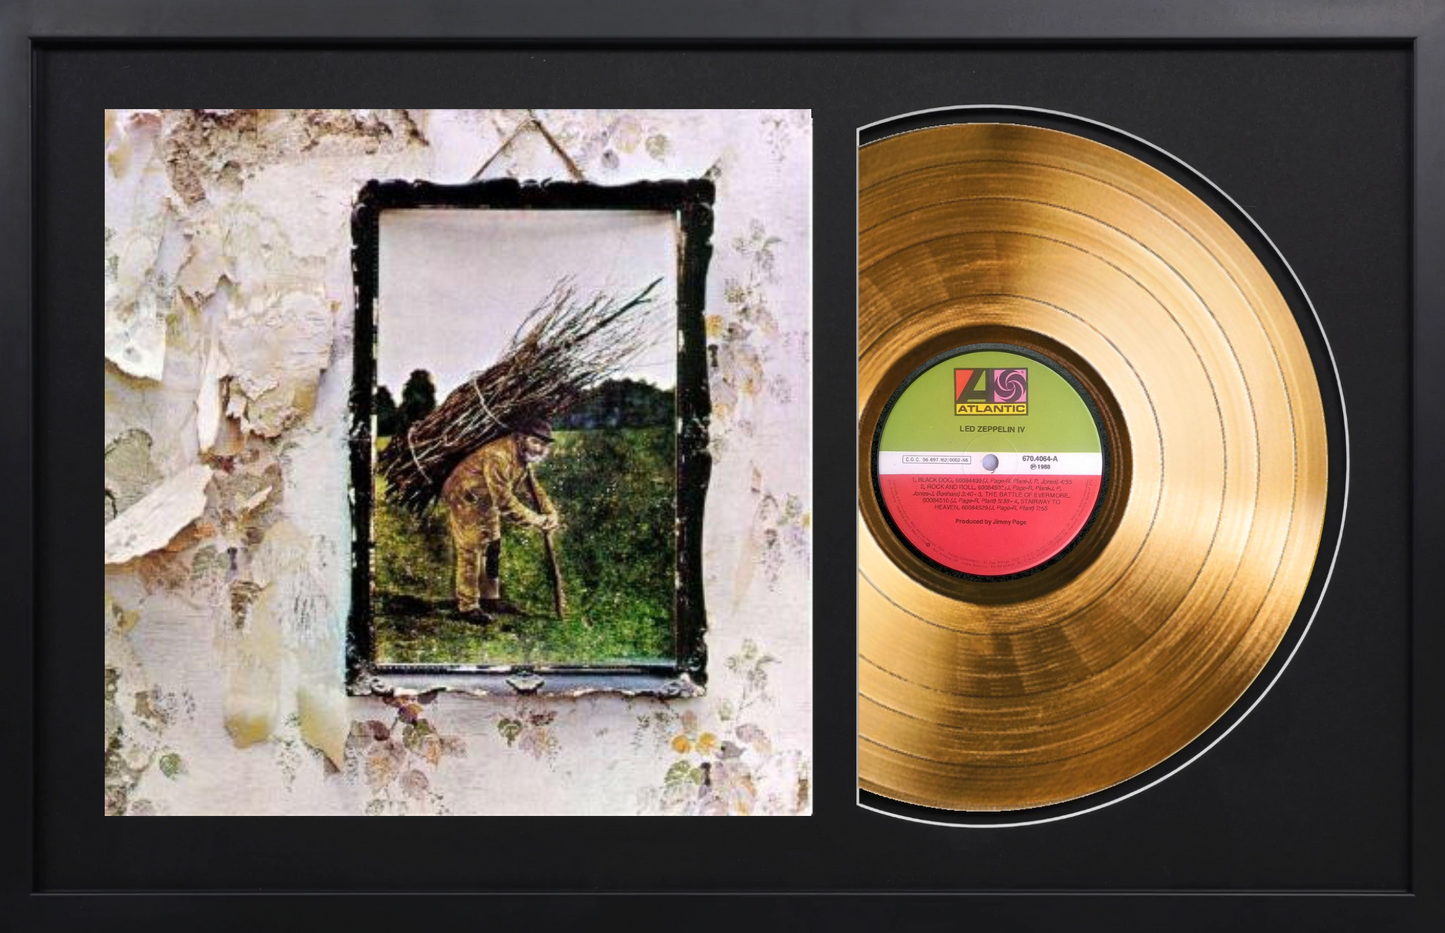 Led Zeppelin - IV - 14K Gold Plated, Limited Edition Album